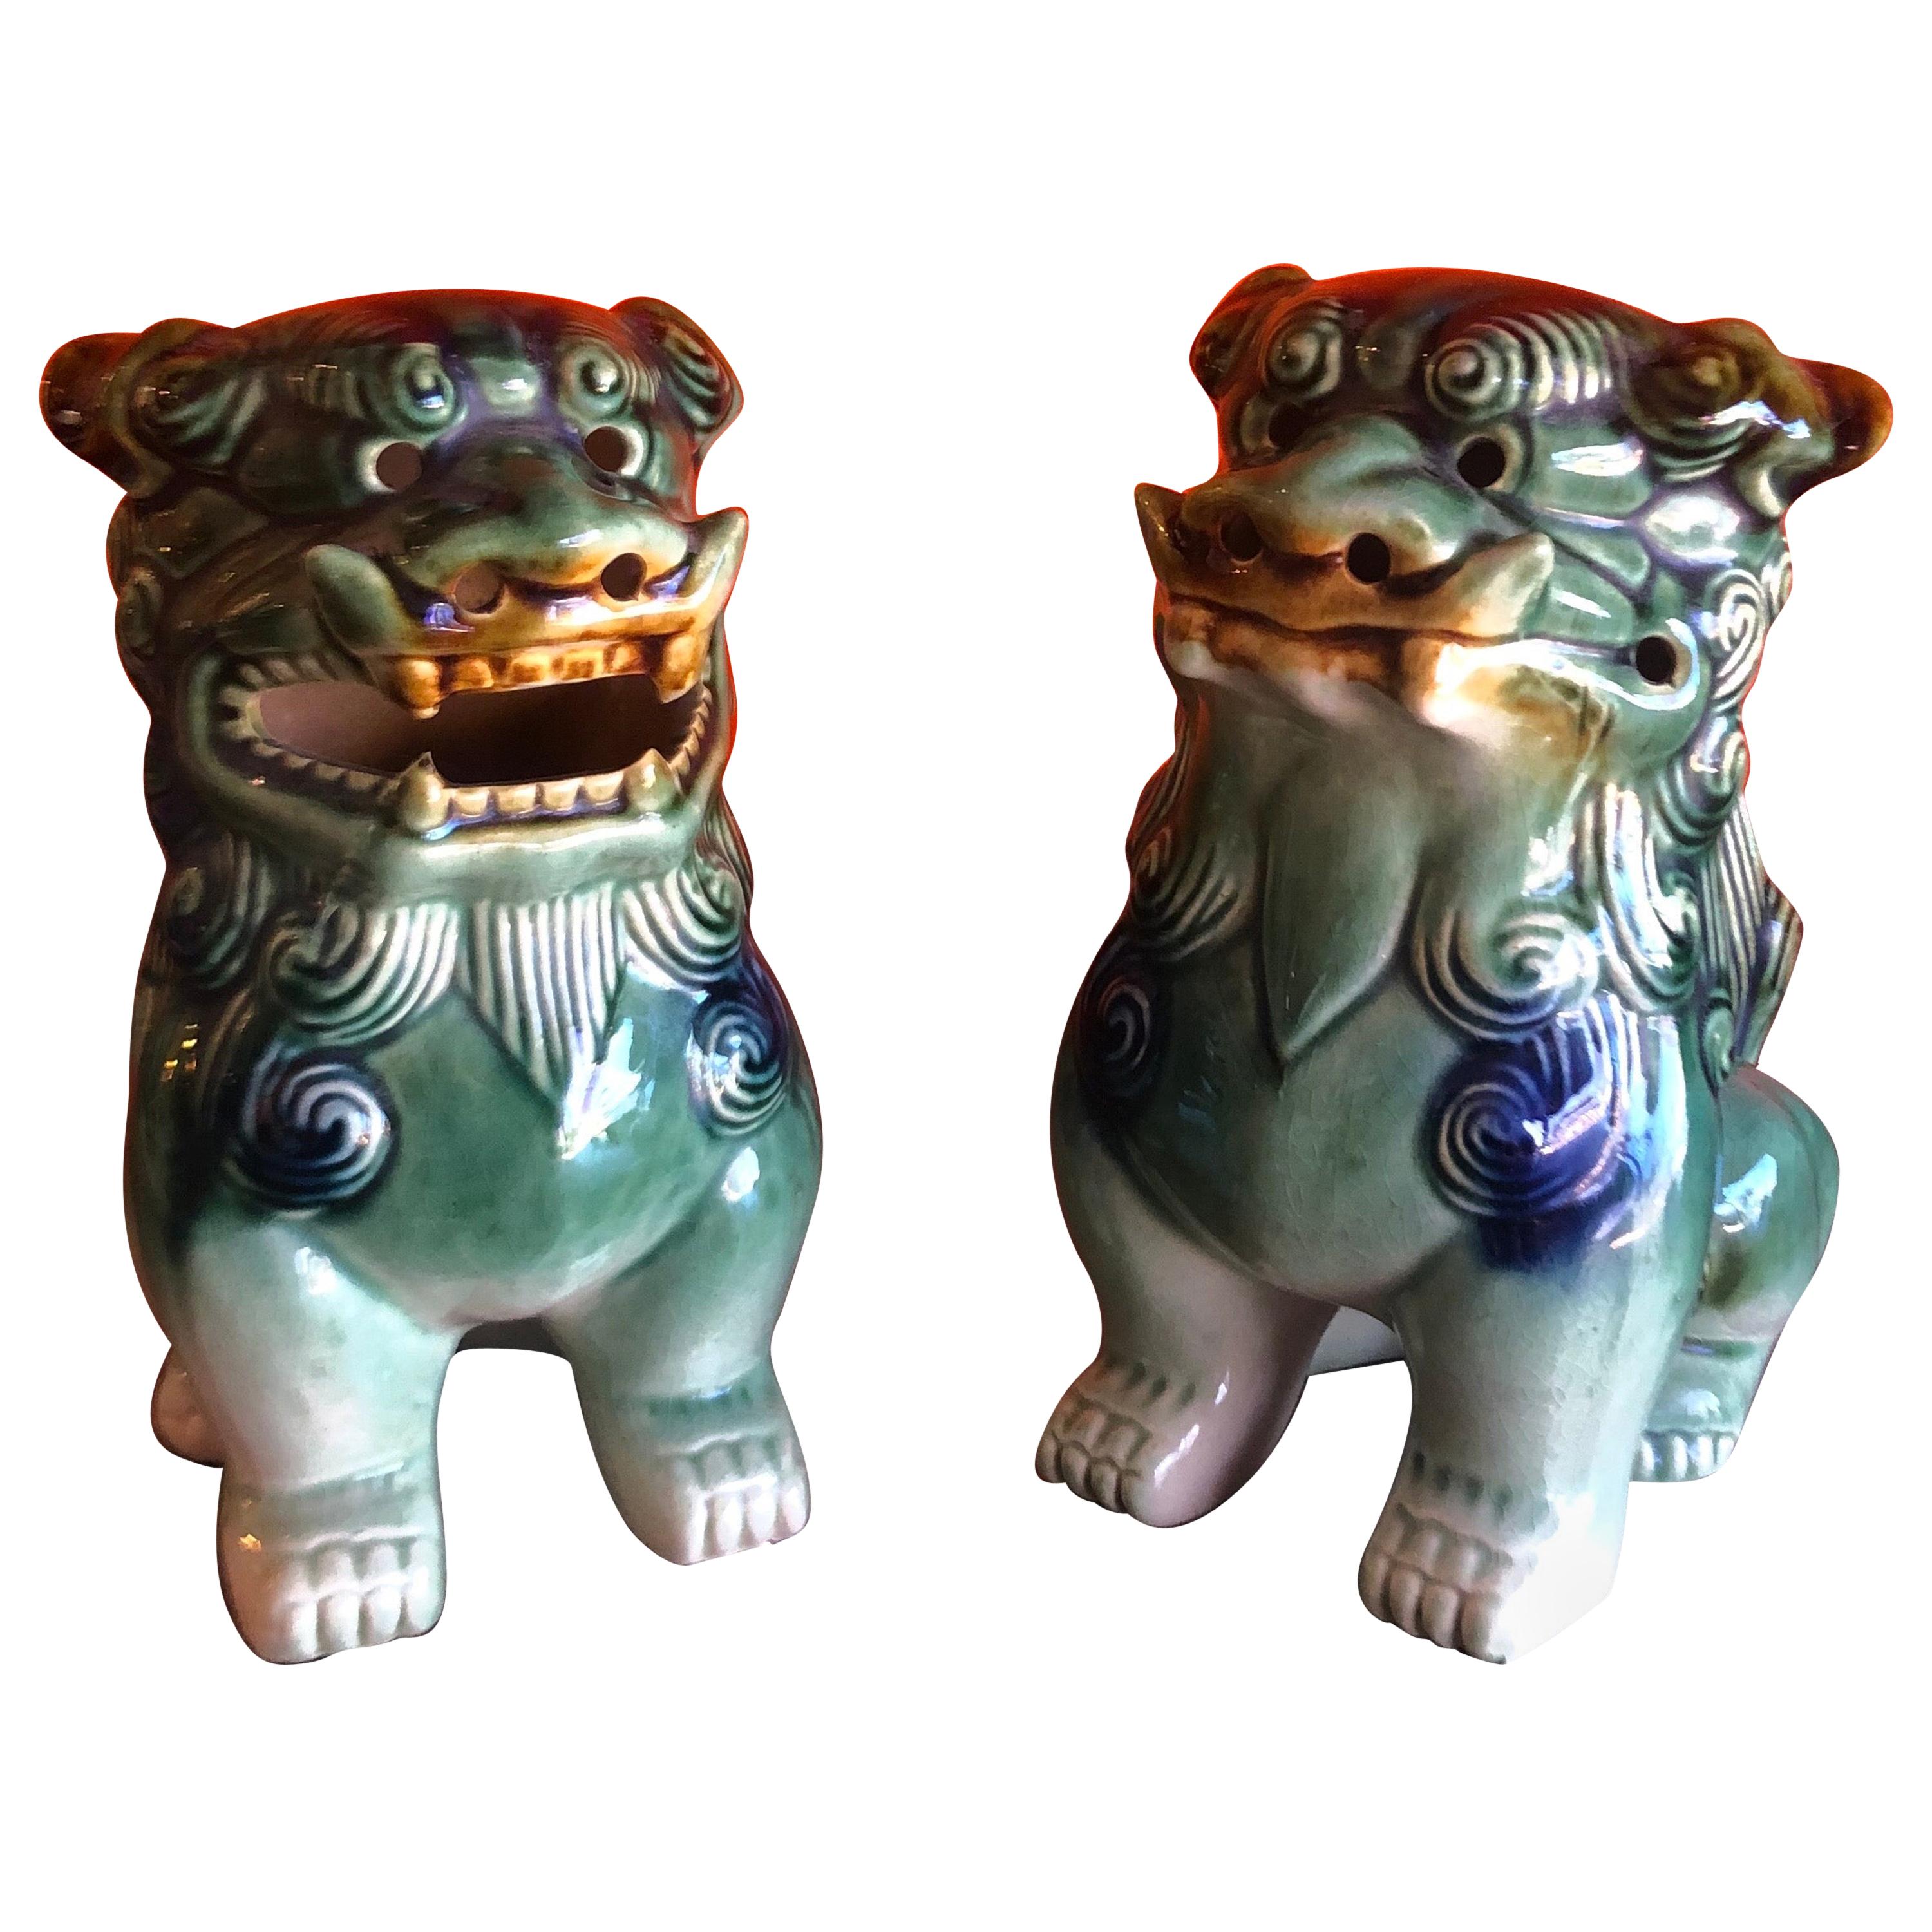 Pair of Midcentury Ceramic Foo Dogs / Bookends